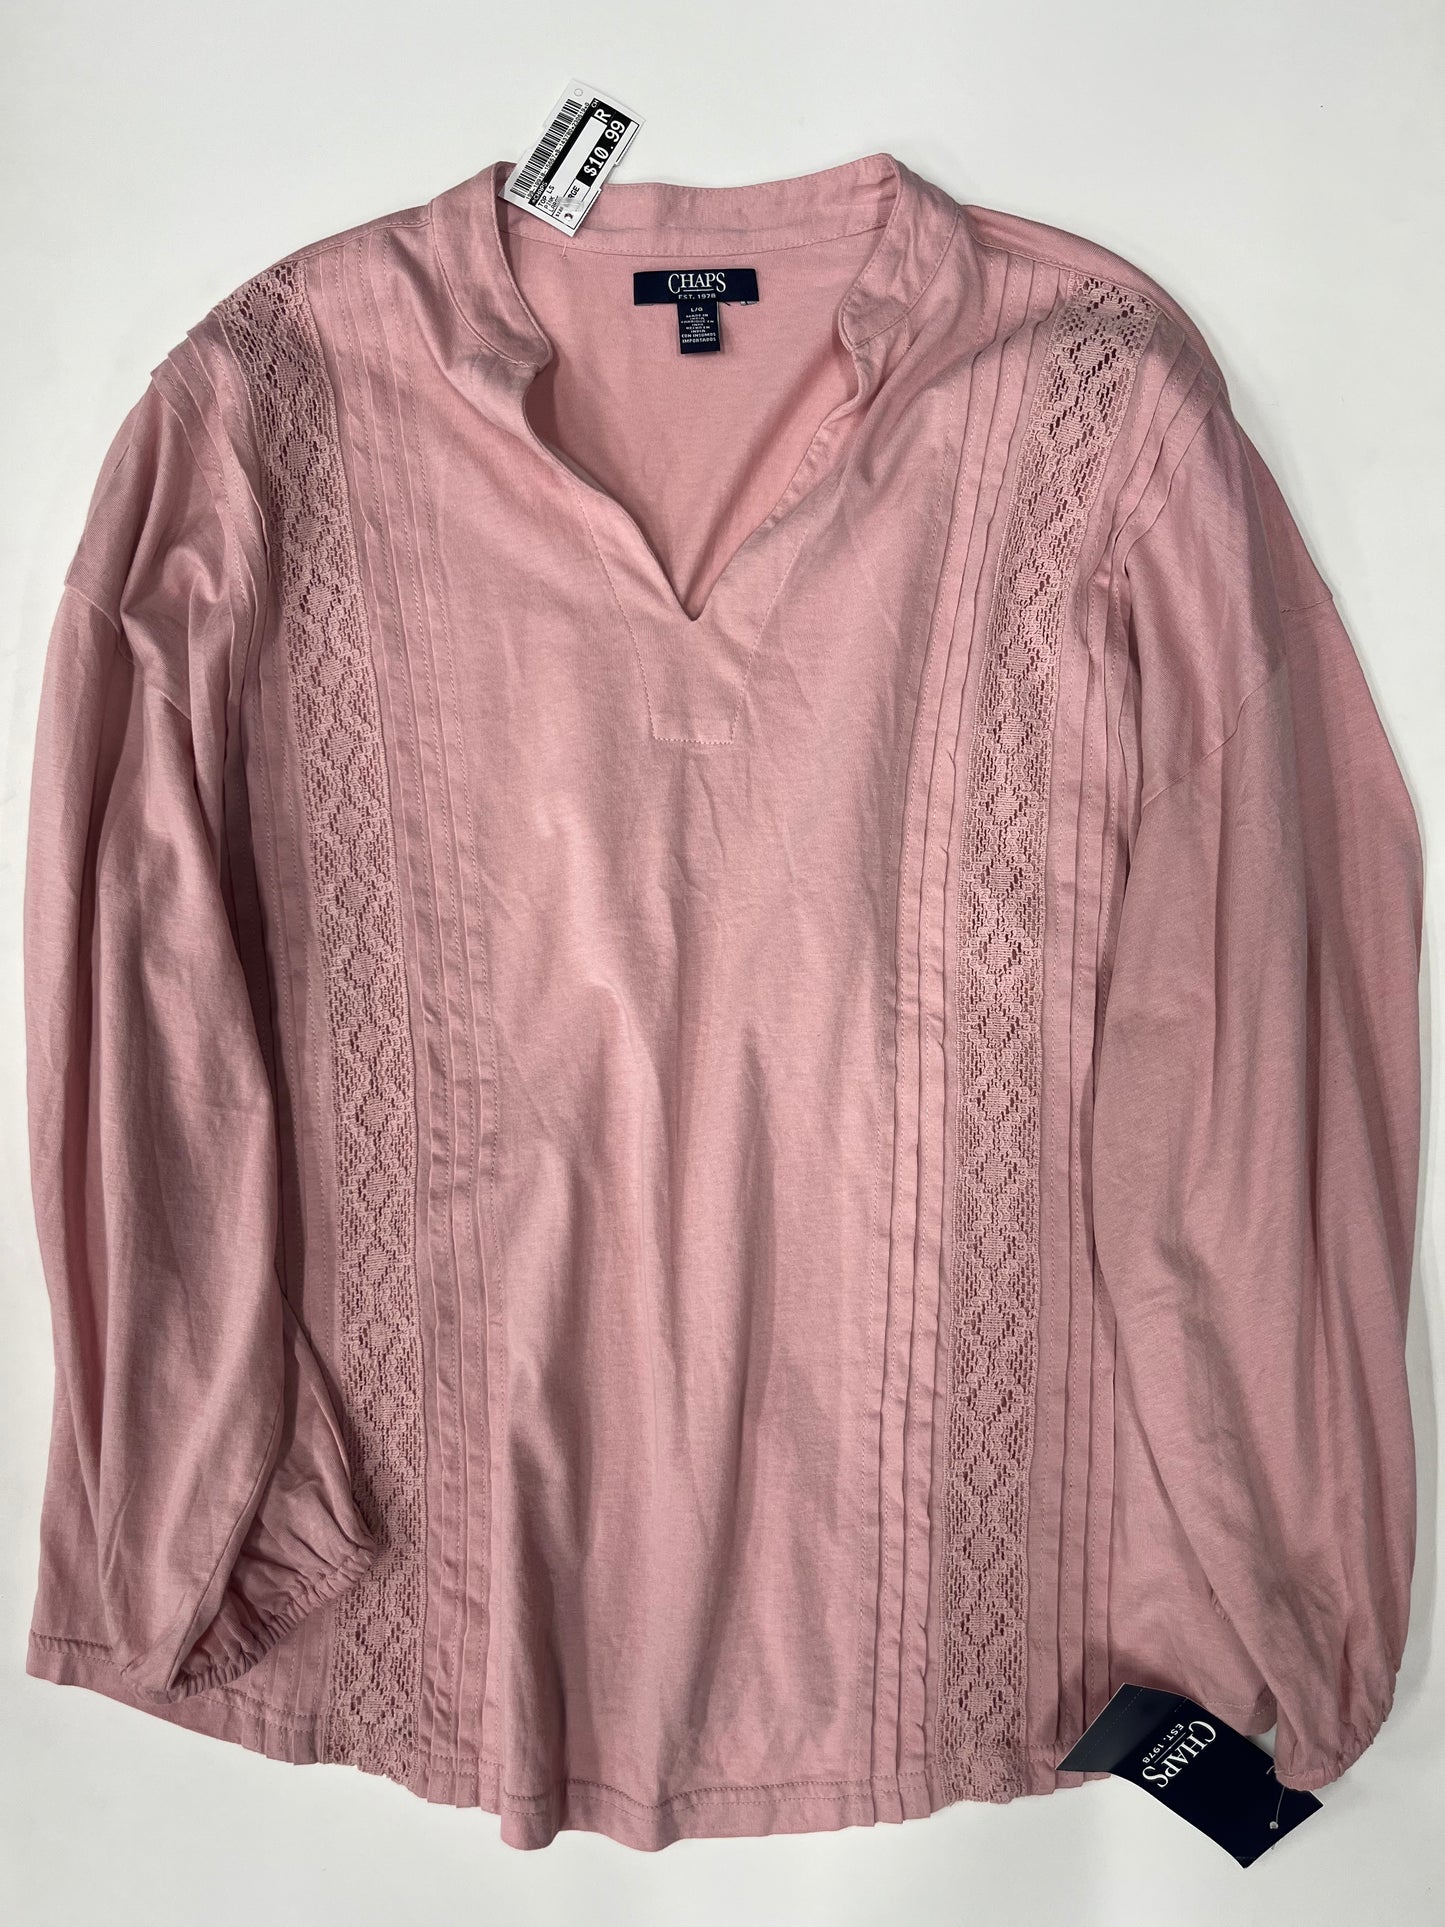 Chaps Long Sleeve Stitched V-Neck Blouse Pink NWT Size L